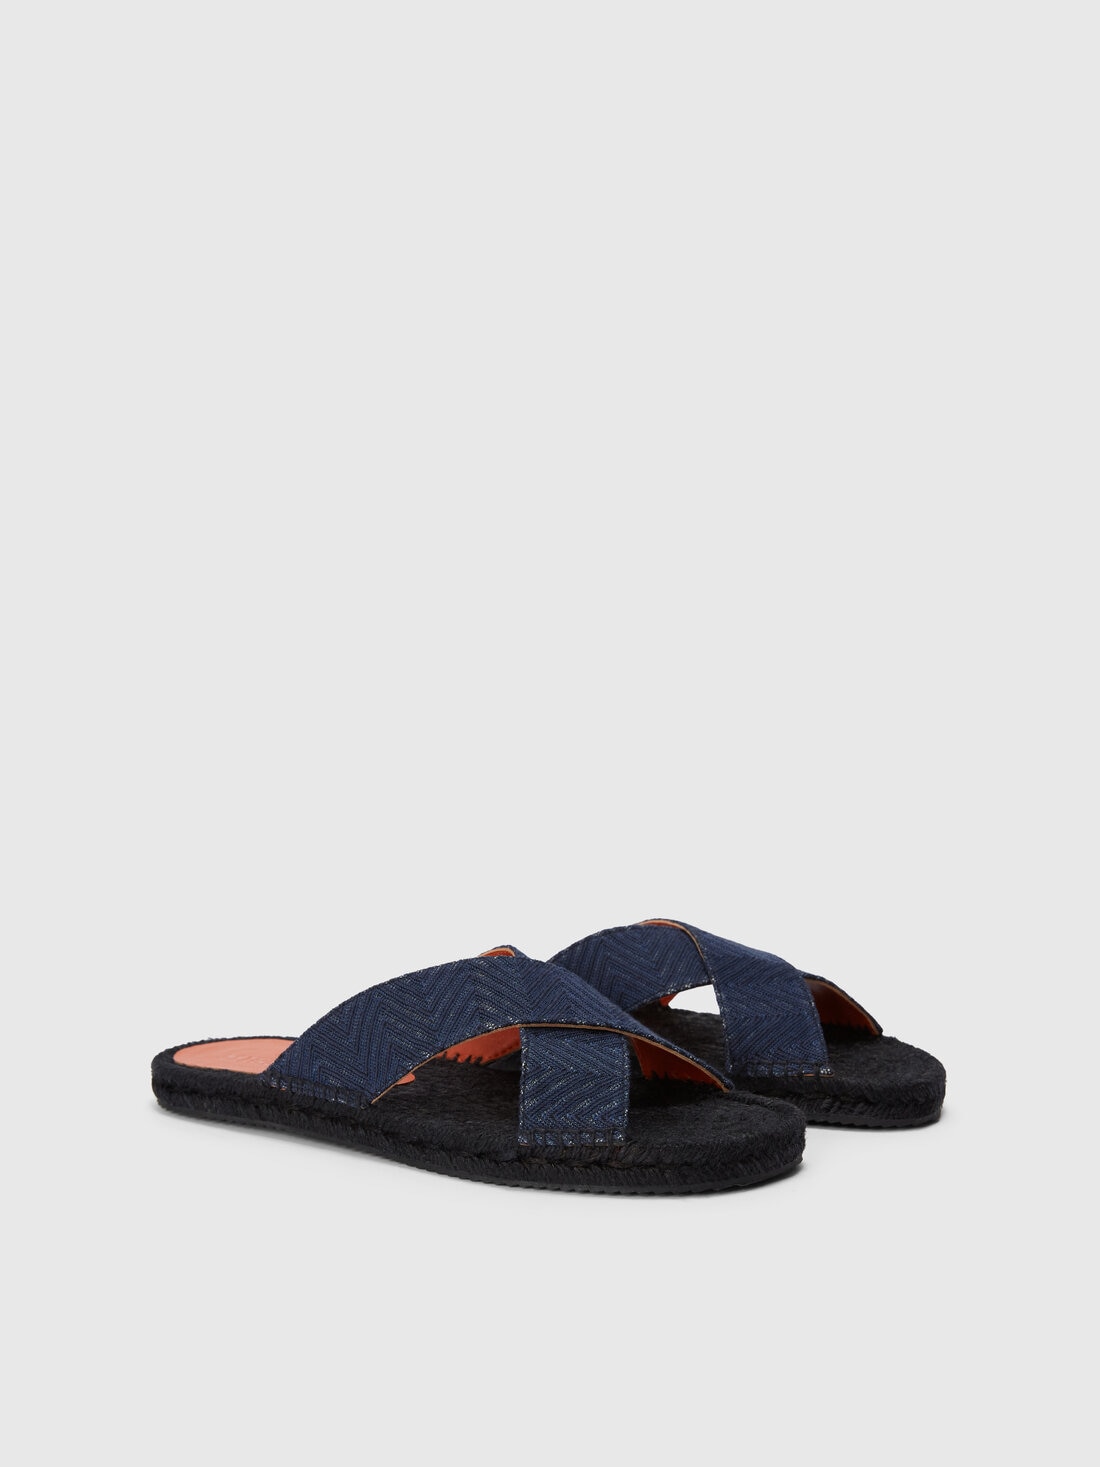 Slippers with double crossed strap and chevron pattern   , Navy Blue  - LS24SY00BV00FZS30DO - 1